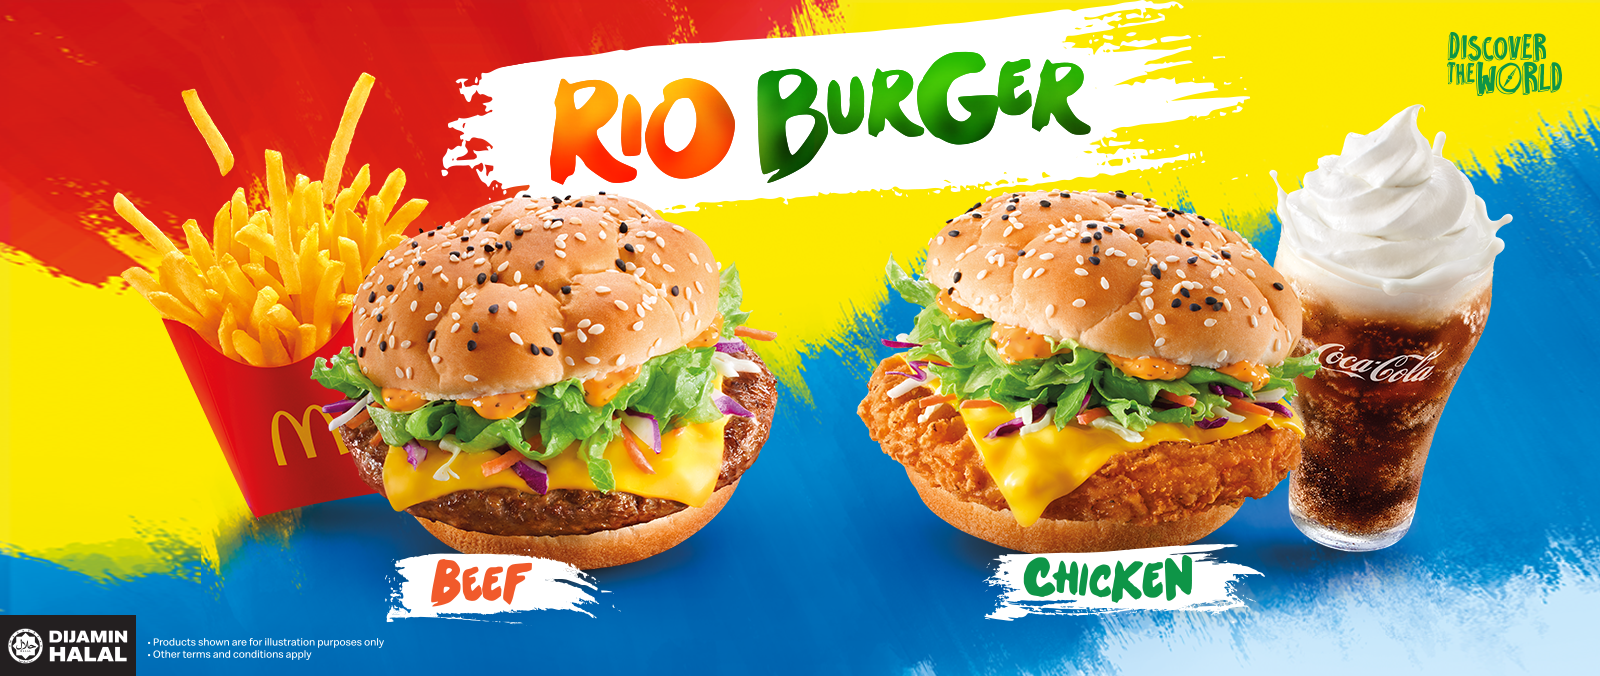 The Rio Burger has arrived! Discover the taste of Brazil at McDonald’s's image'